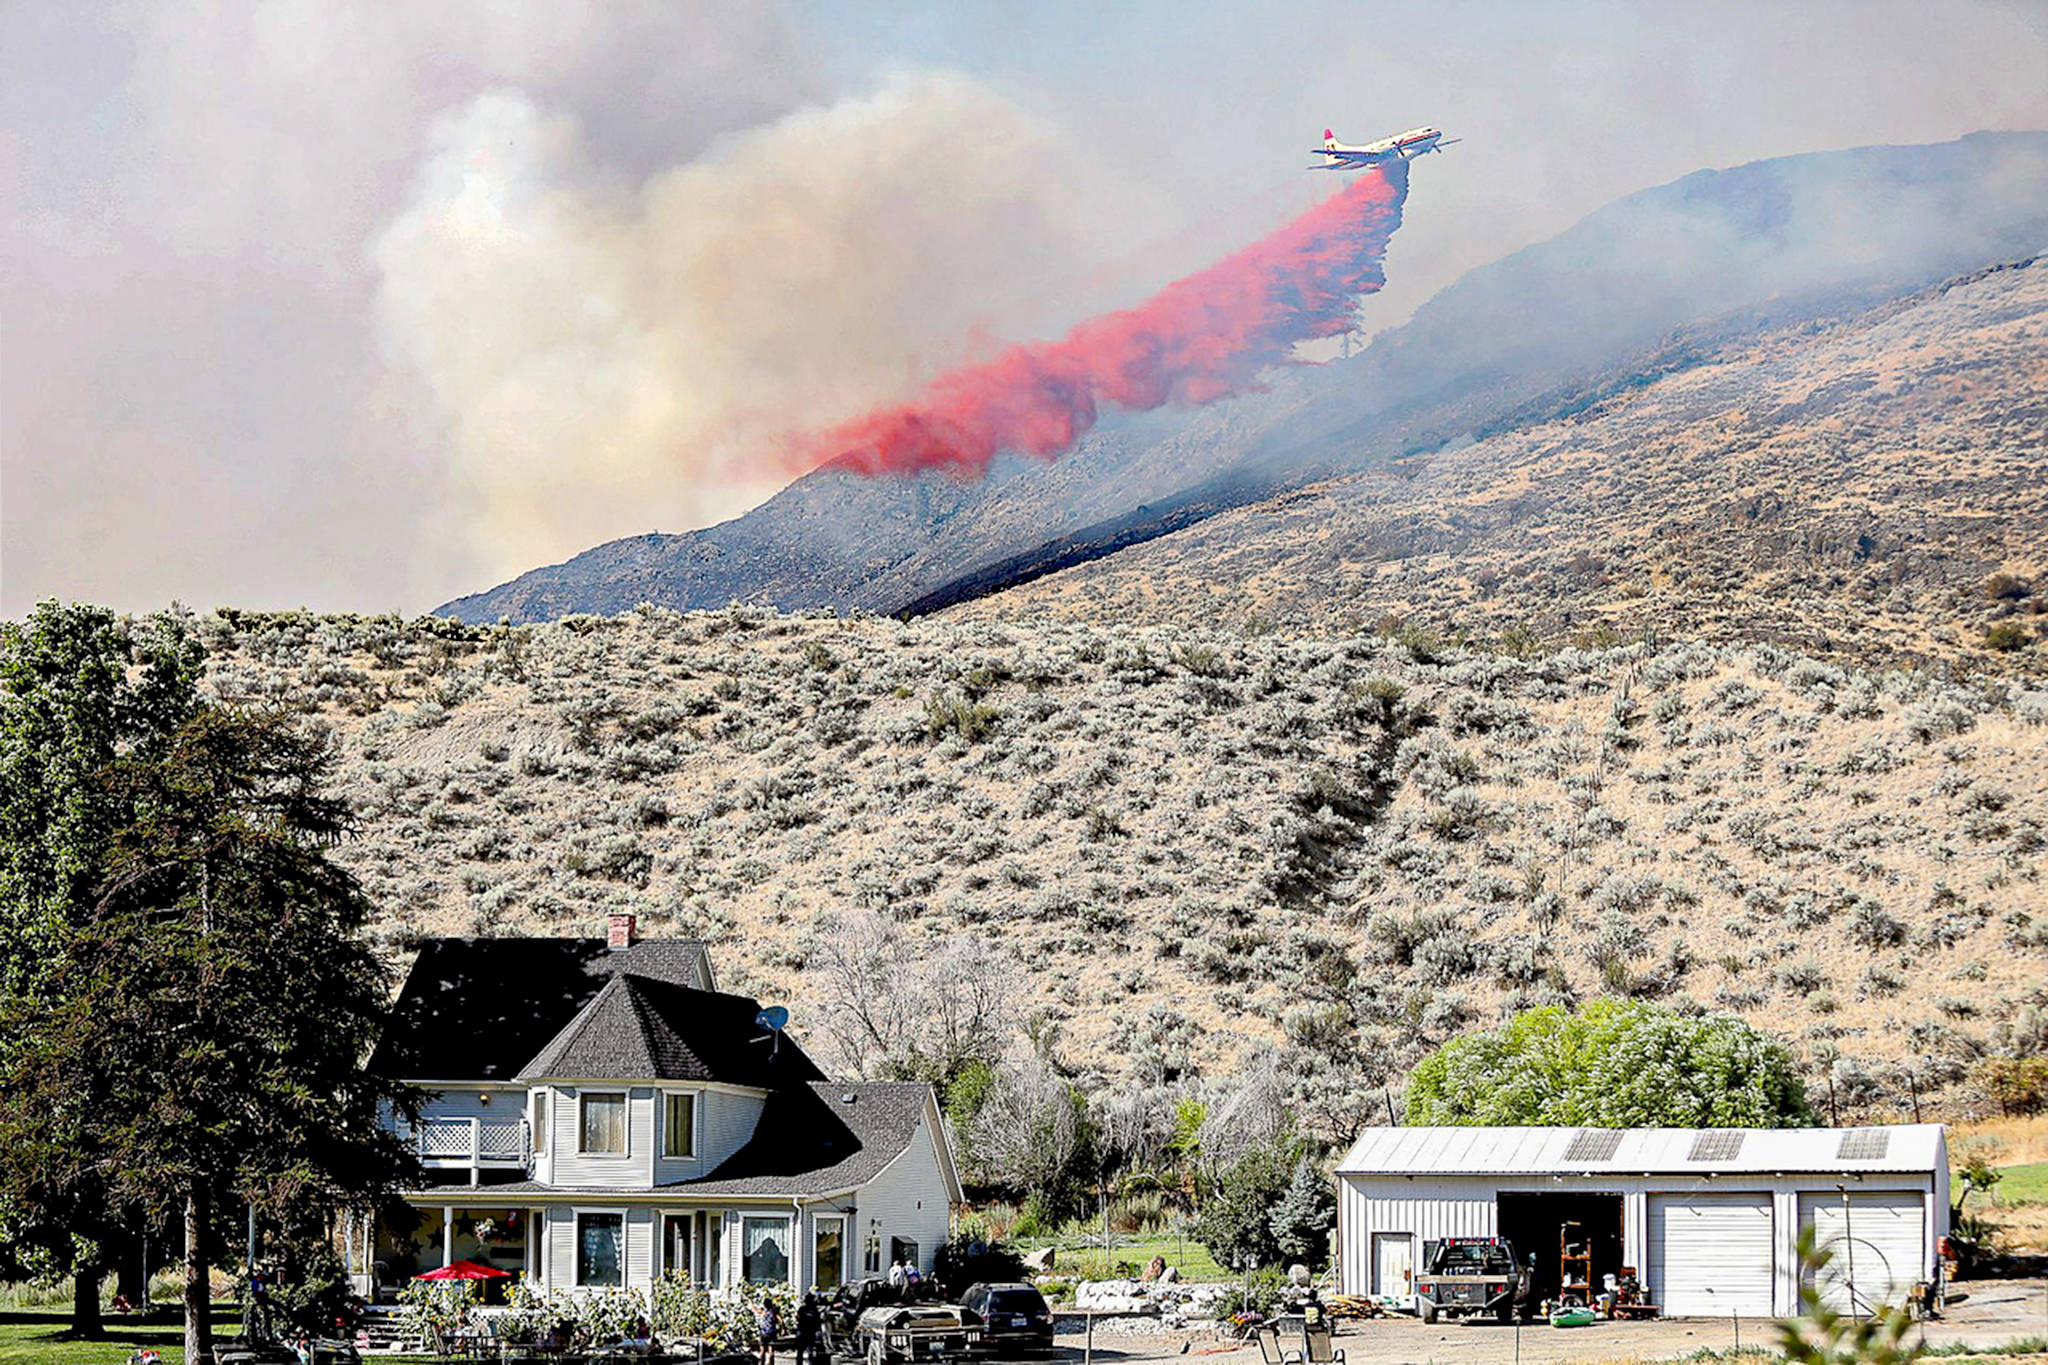 A plane drops fire retardant on the Palmer Mountain Fire last summer in north-central Washington. Laura Knowlton/Sound Publishing staff photo